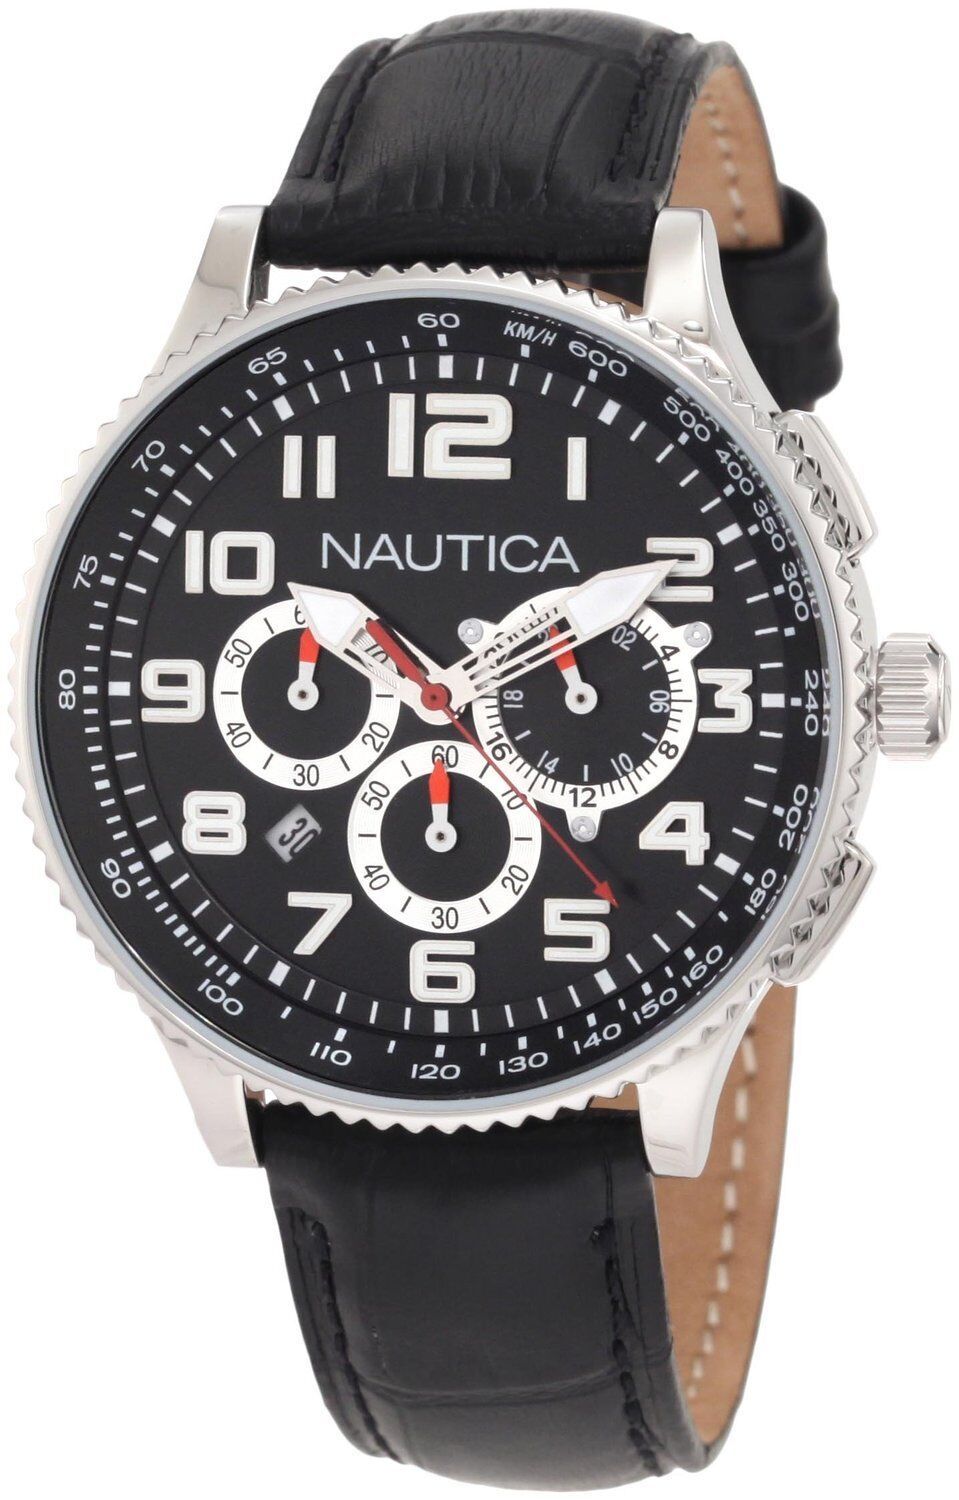 Primary image for Nautica N22596M Midsize Chronograph Watch Round Dial Black Leather Strap OCN 38